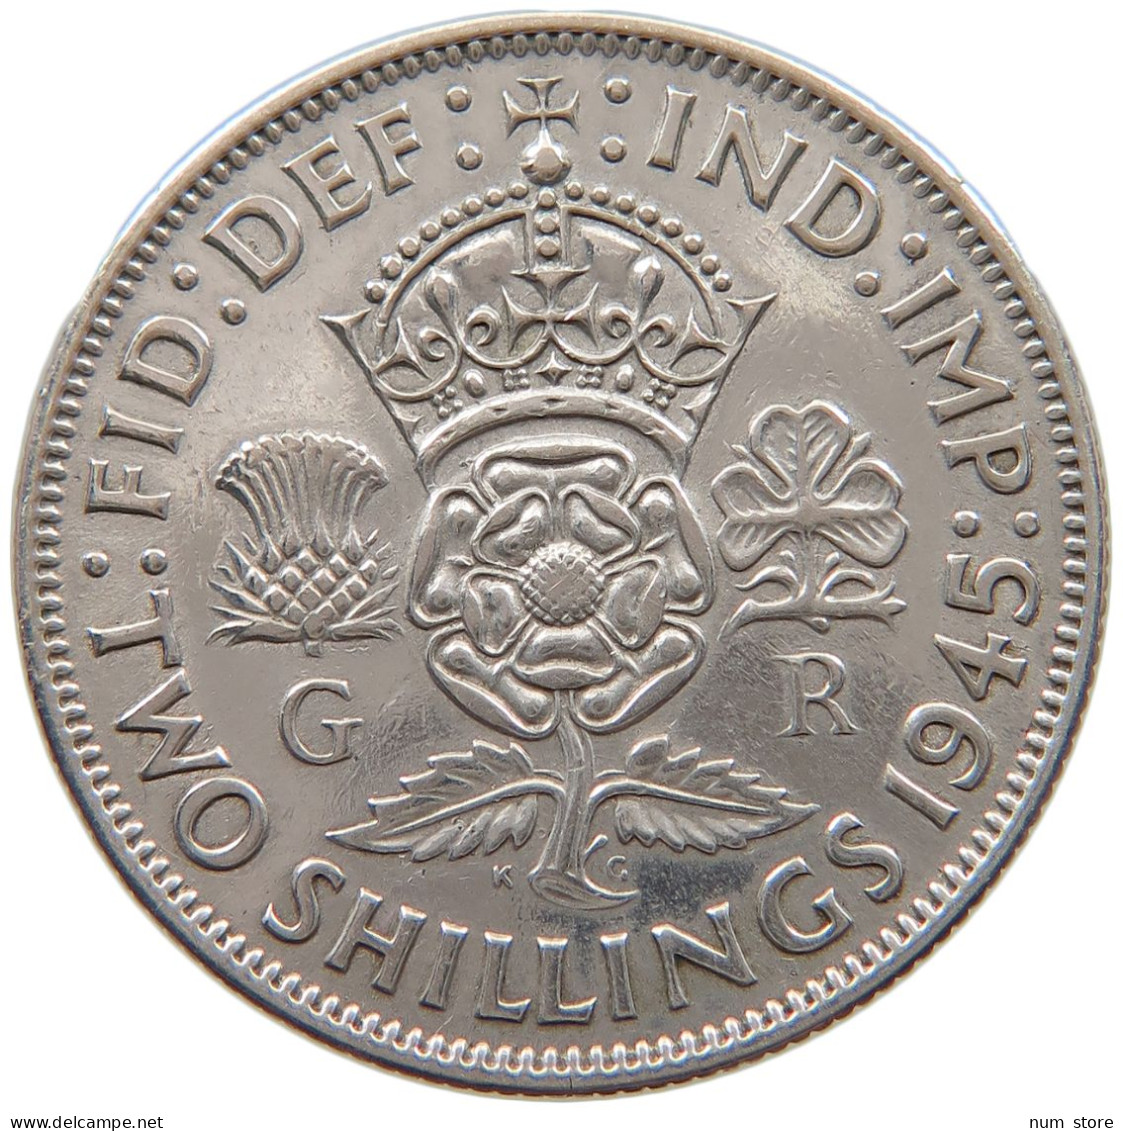 GREAT BRITAIN TWO SHILLINGS 1945 George VI. (1936-1952) #a052 0107 - J. 1 Florin / 2 Schillings